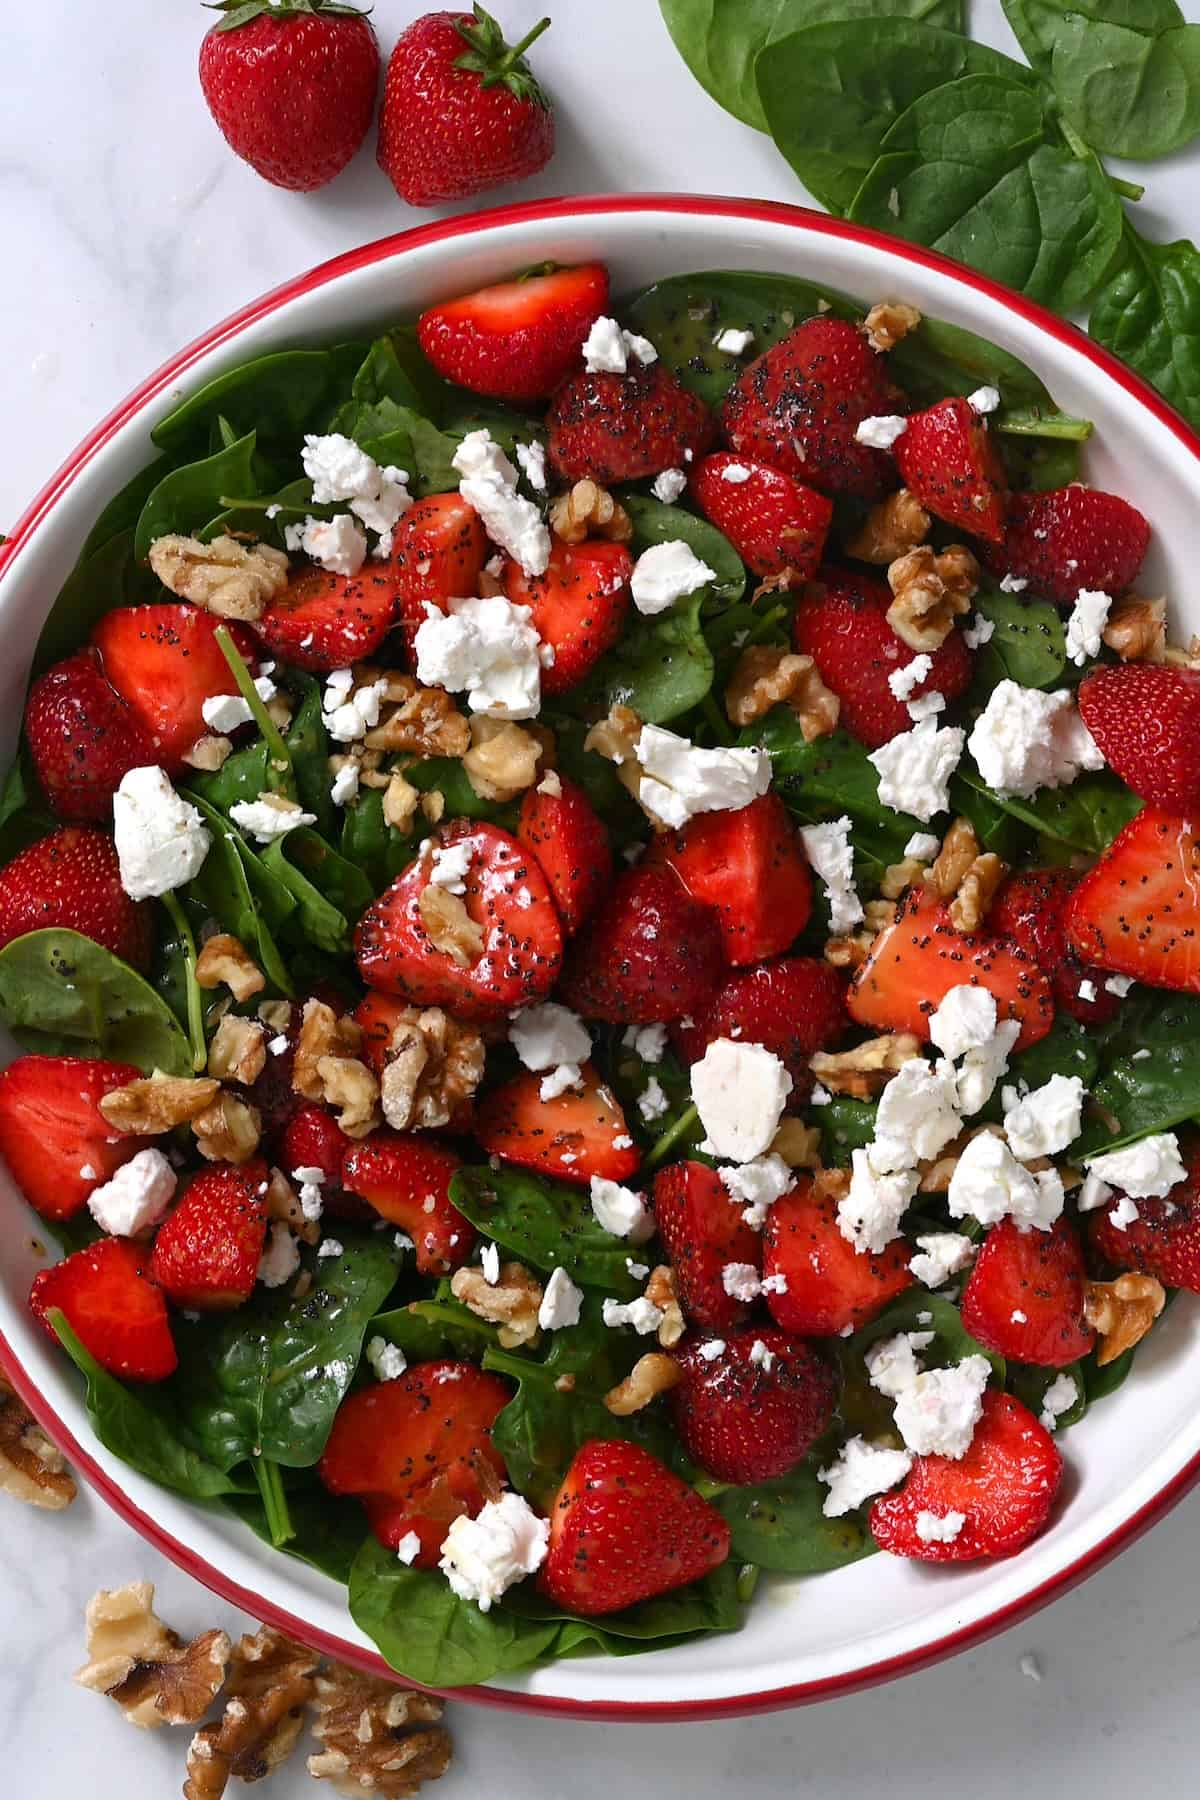 Strawberry spinach salad topped with feta and walnuts